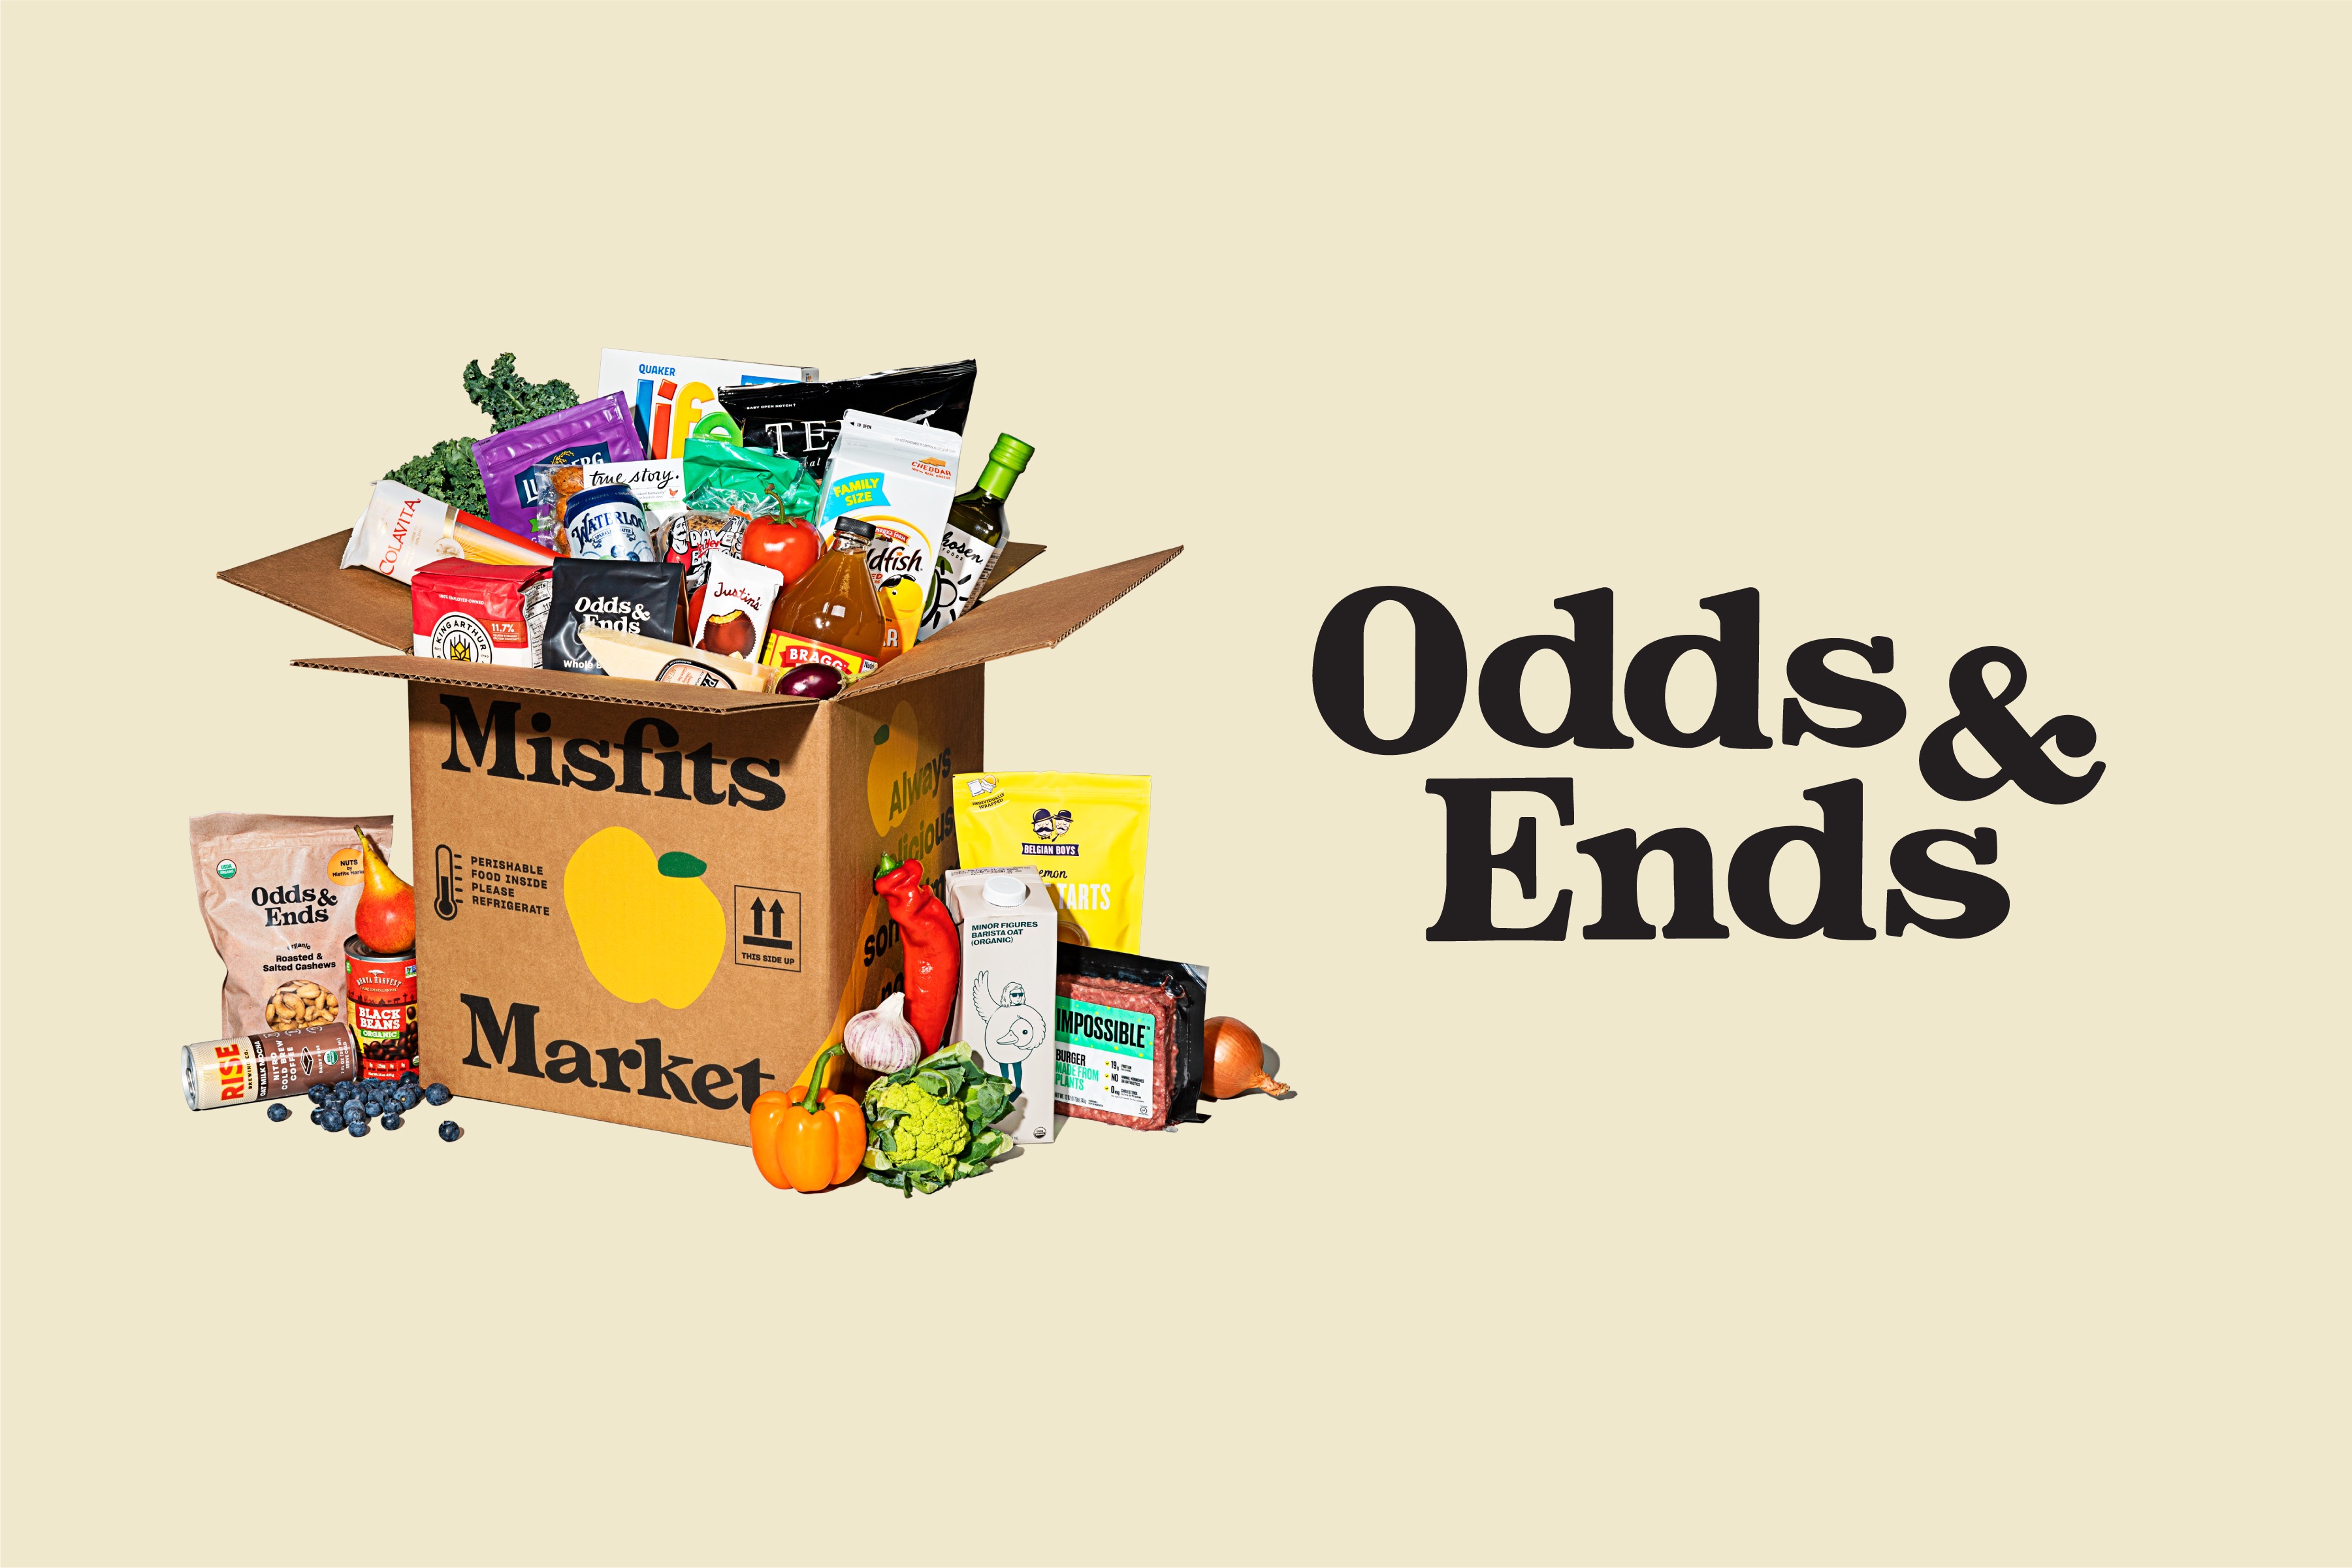 Fandom Inspires Thoughtmatter’s Identity for Misfits Market’s New Private Label Brand, Odds & Ends